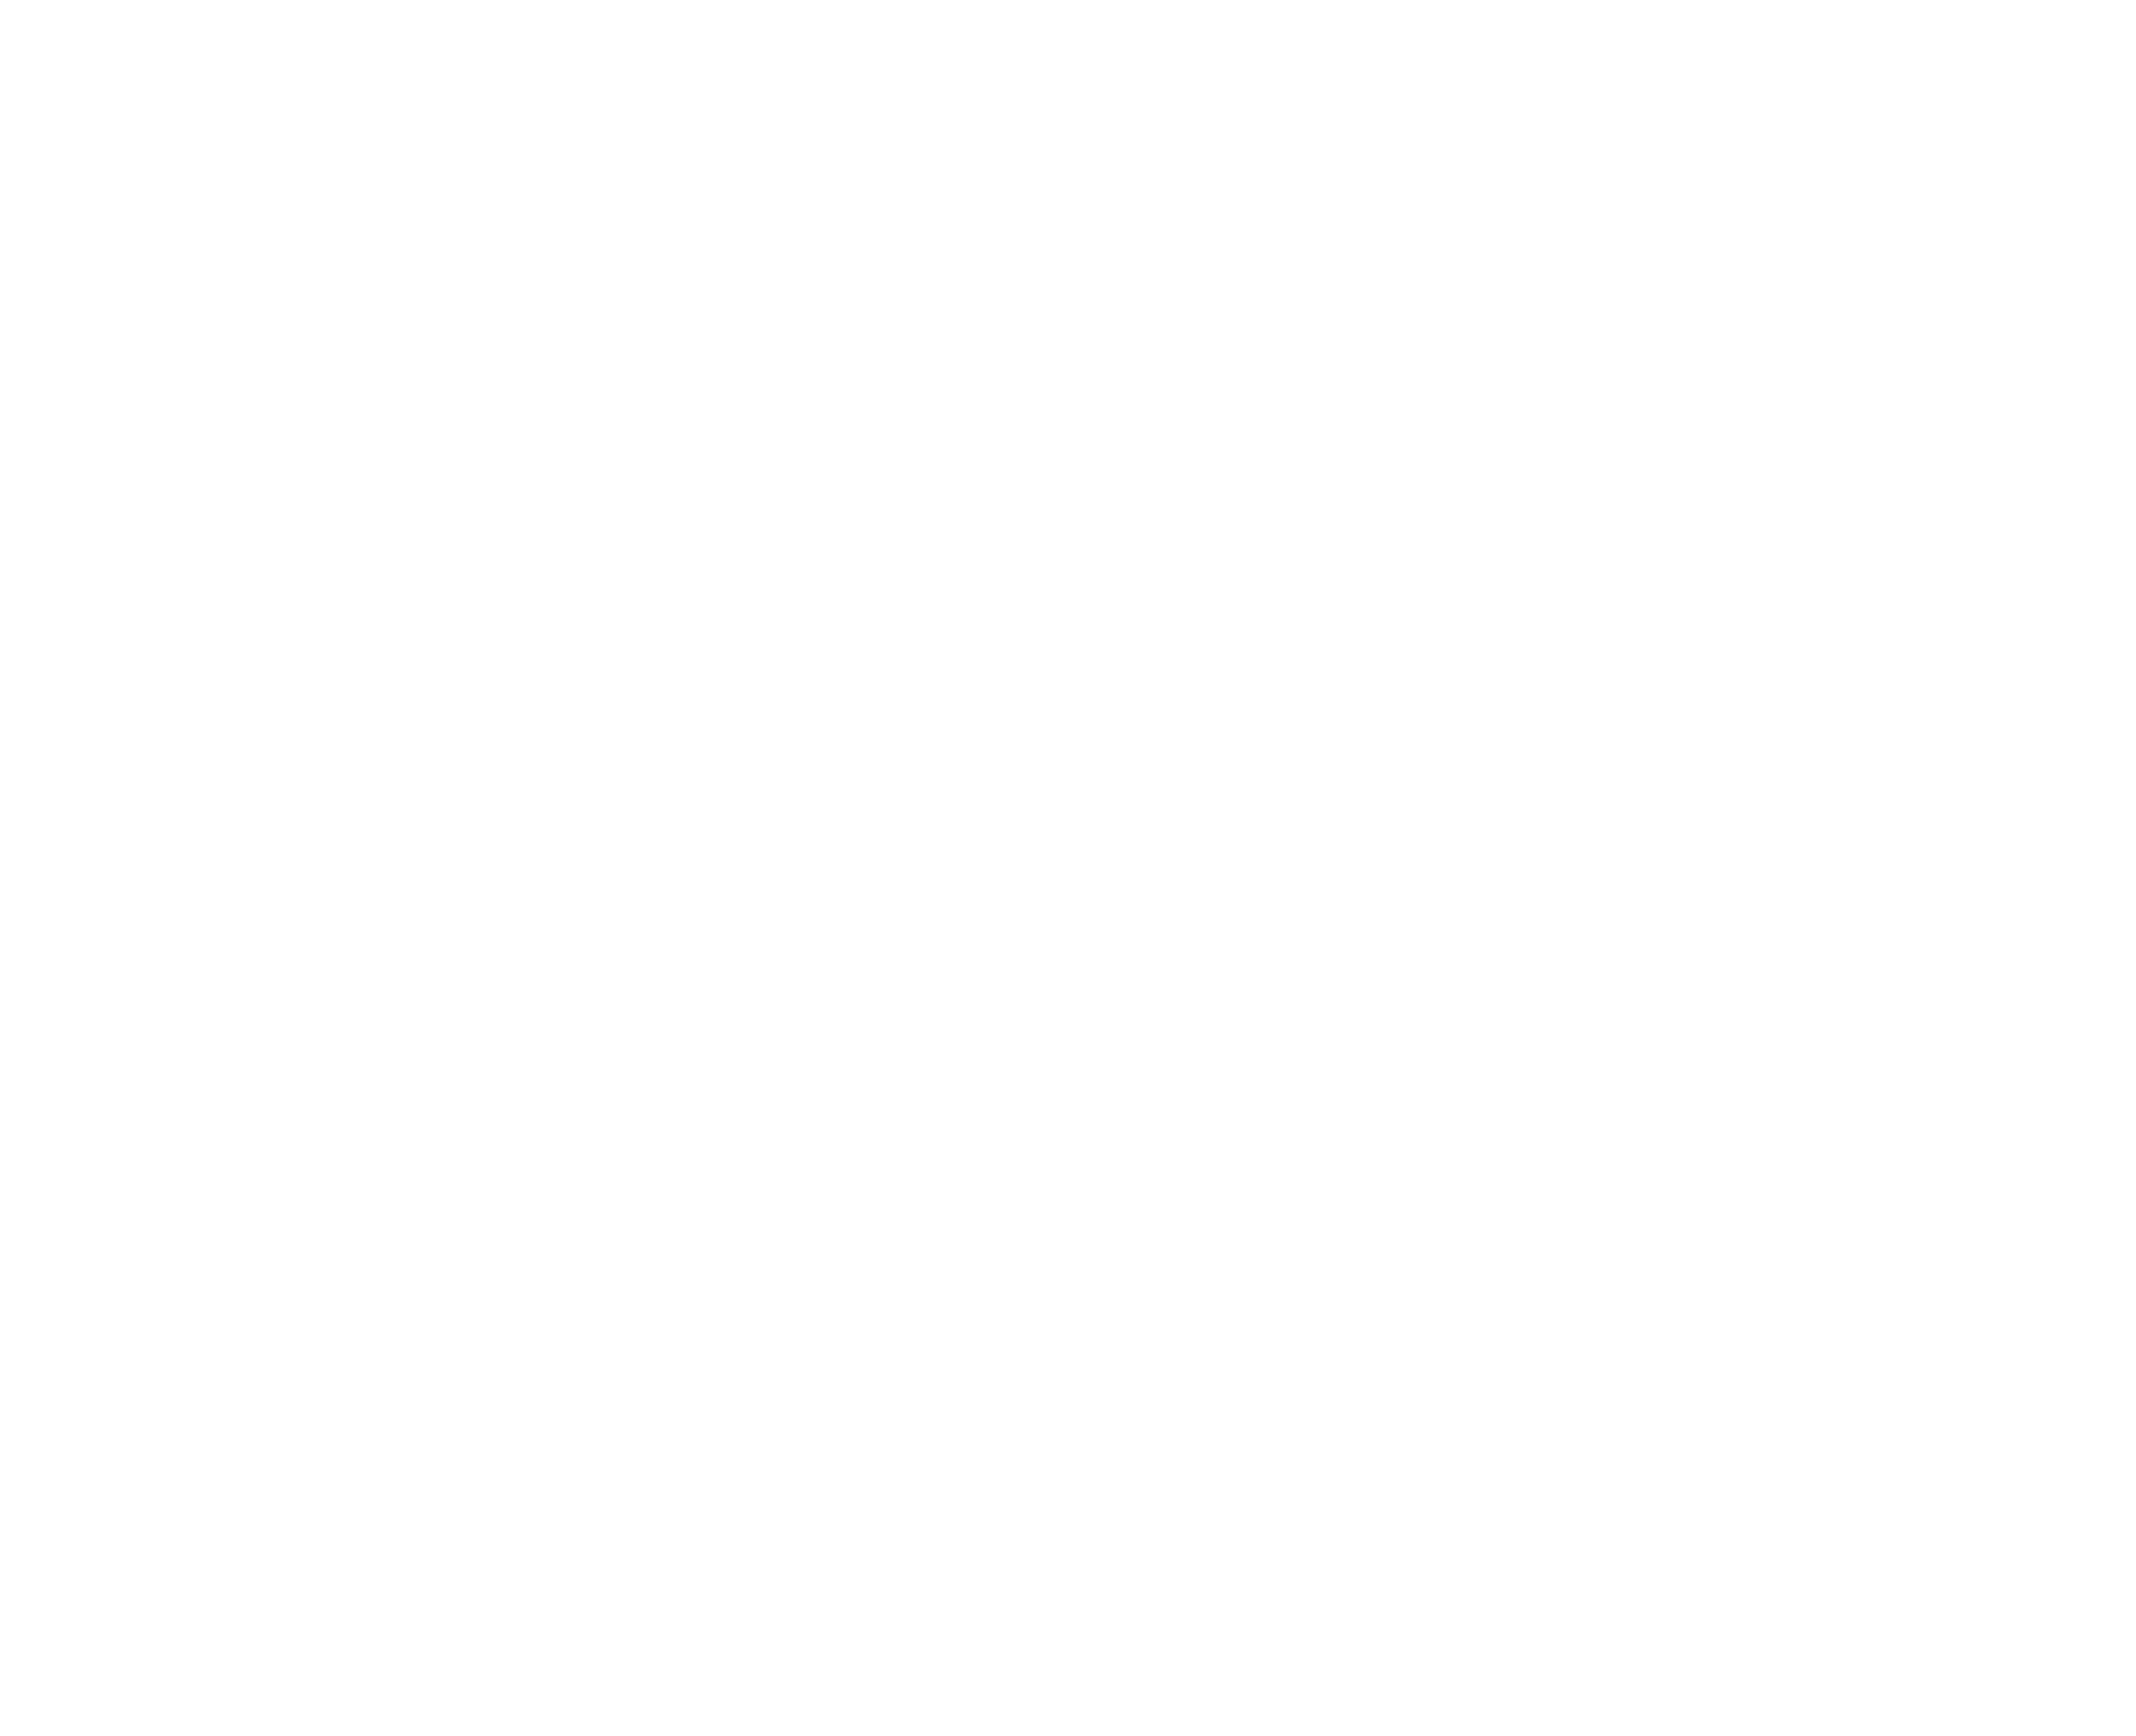 ISO 9001:2016 Quality Management Systems (QMS)